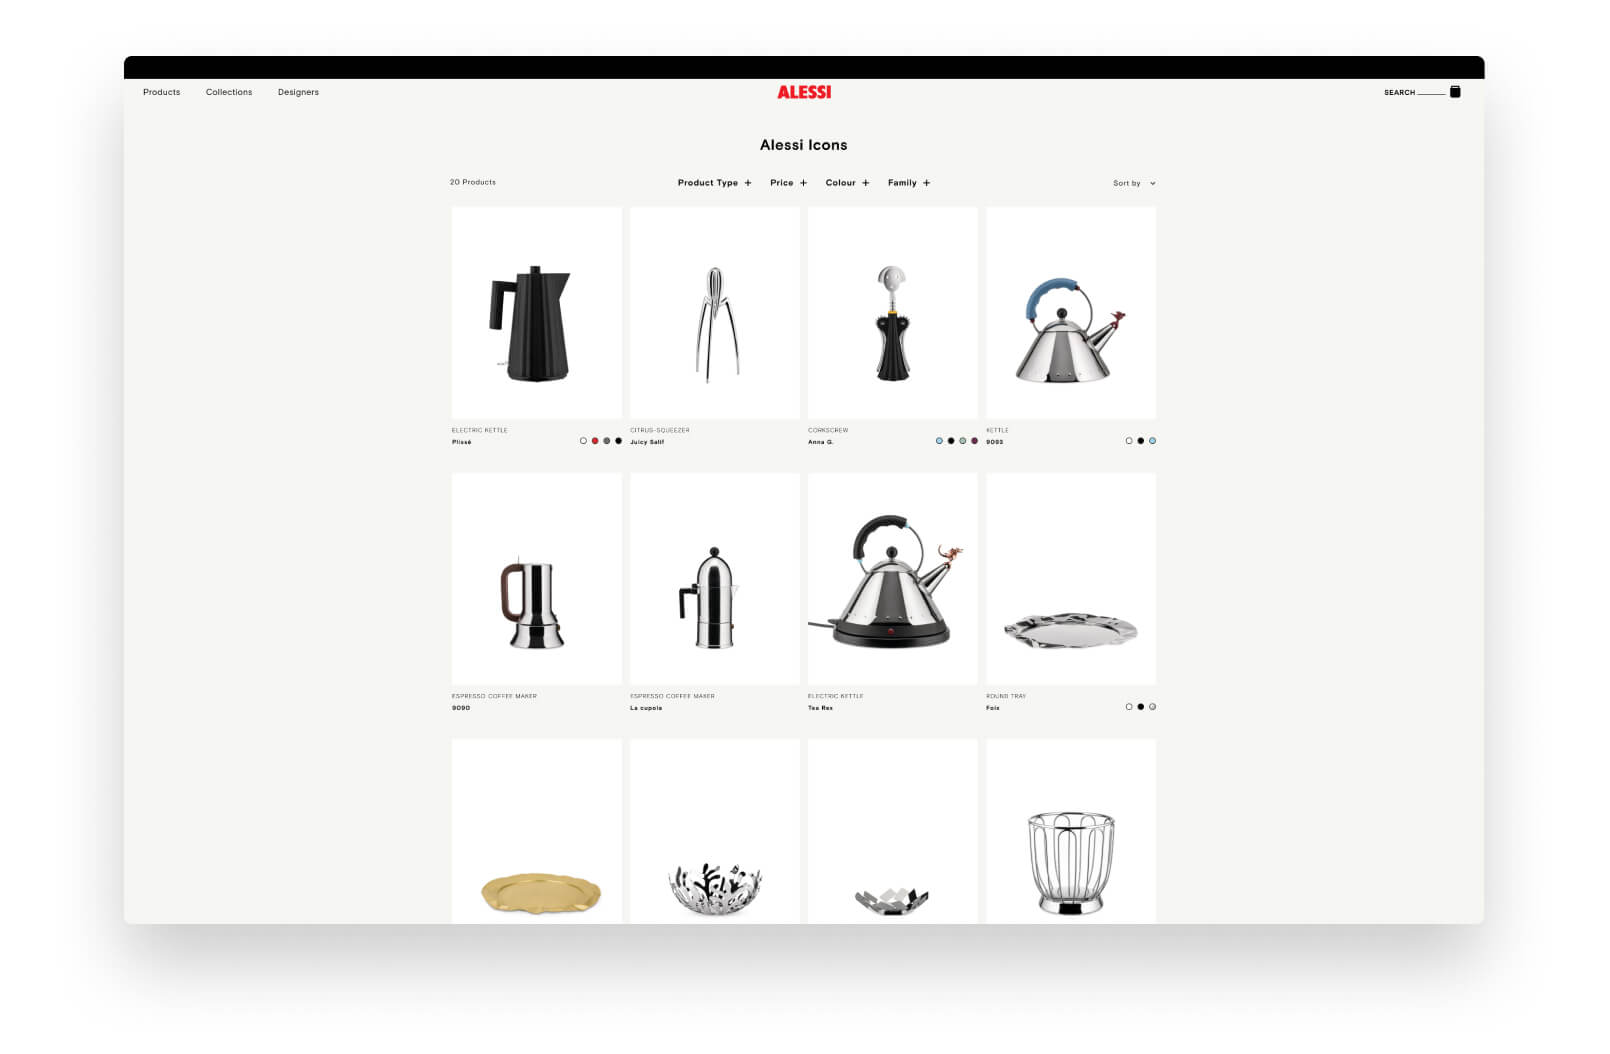 A screenshot of the Alessi online store displayed on desktop, showing various different types of kitchenware.